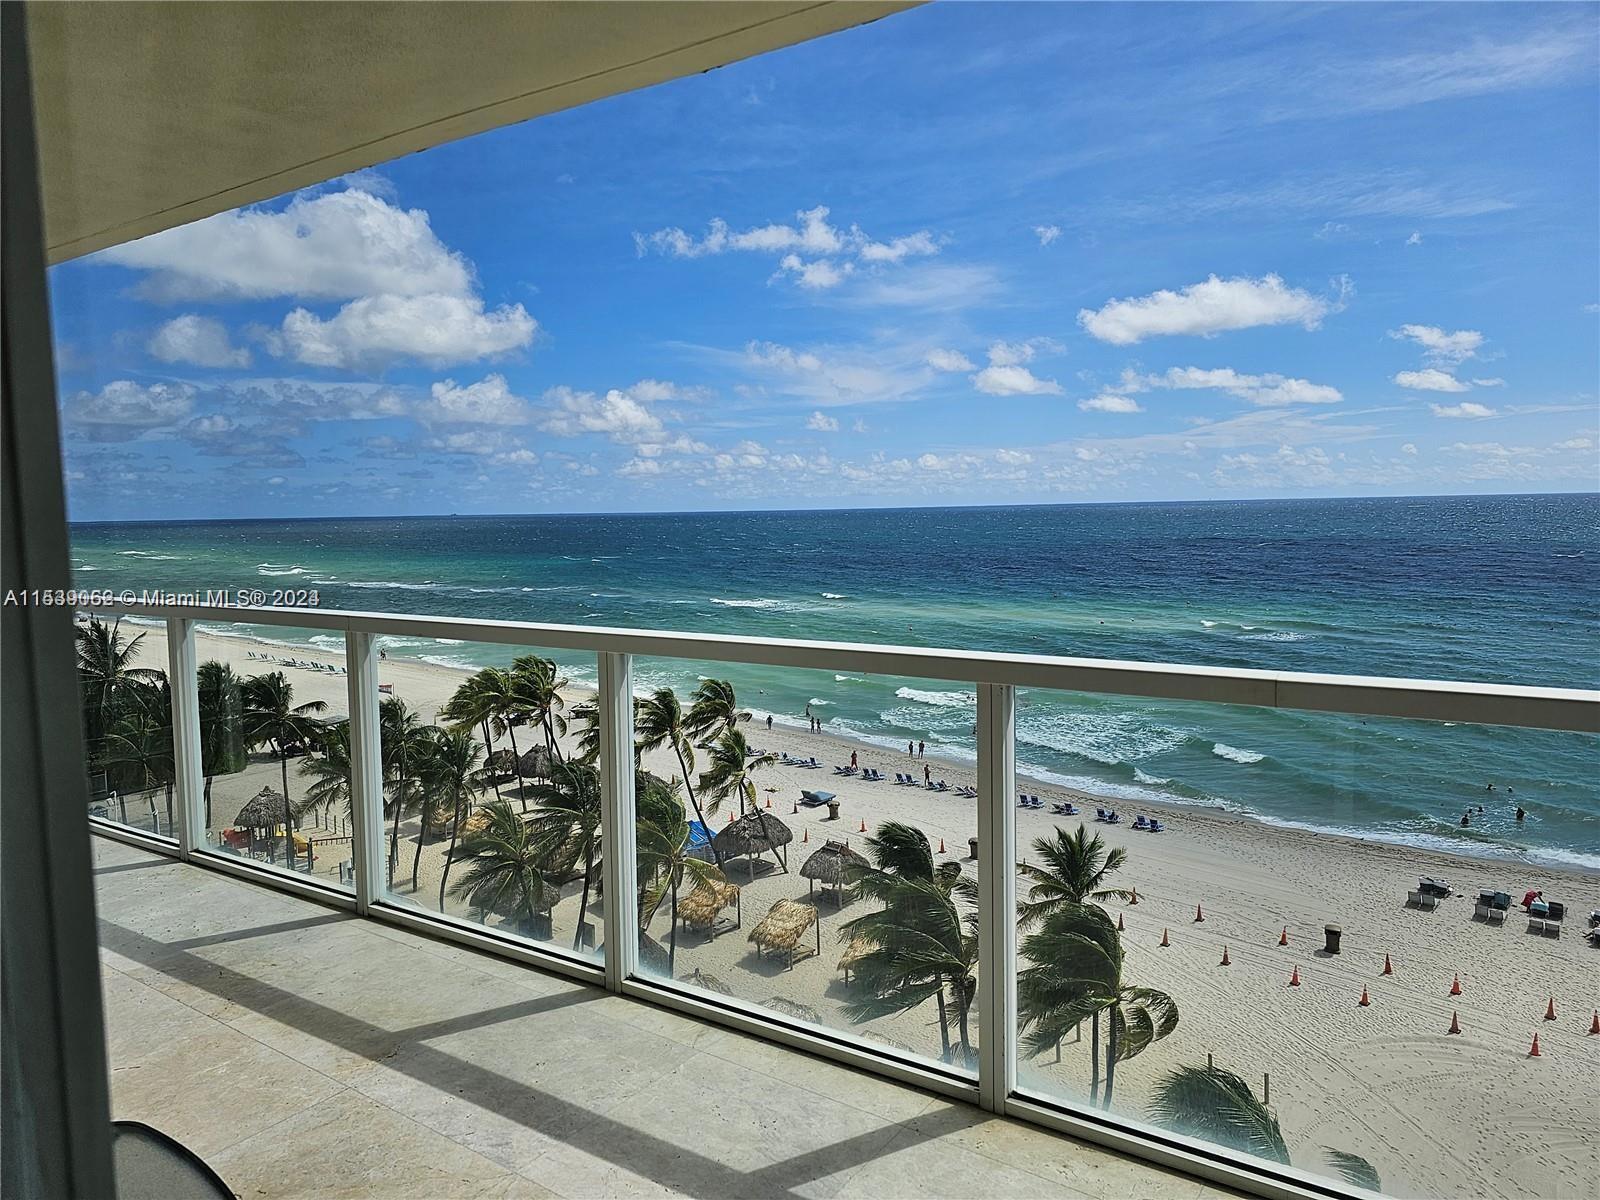 Beautiful 2 bedrooms 2.5 baths with direct ocean views in Sunny Isles Beach Fully furnished Open floor plan
La Perla condominium offers 5 star amenities like 24 hrs concierge pool gym valet parking recreation room beach service Walk to shops cafes and restaurants Just minutes to Aventura Mall Bal Harbour Shops